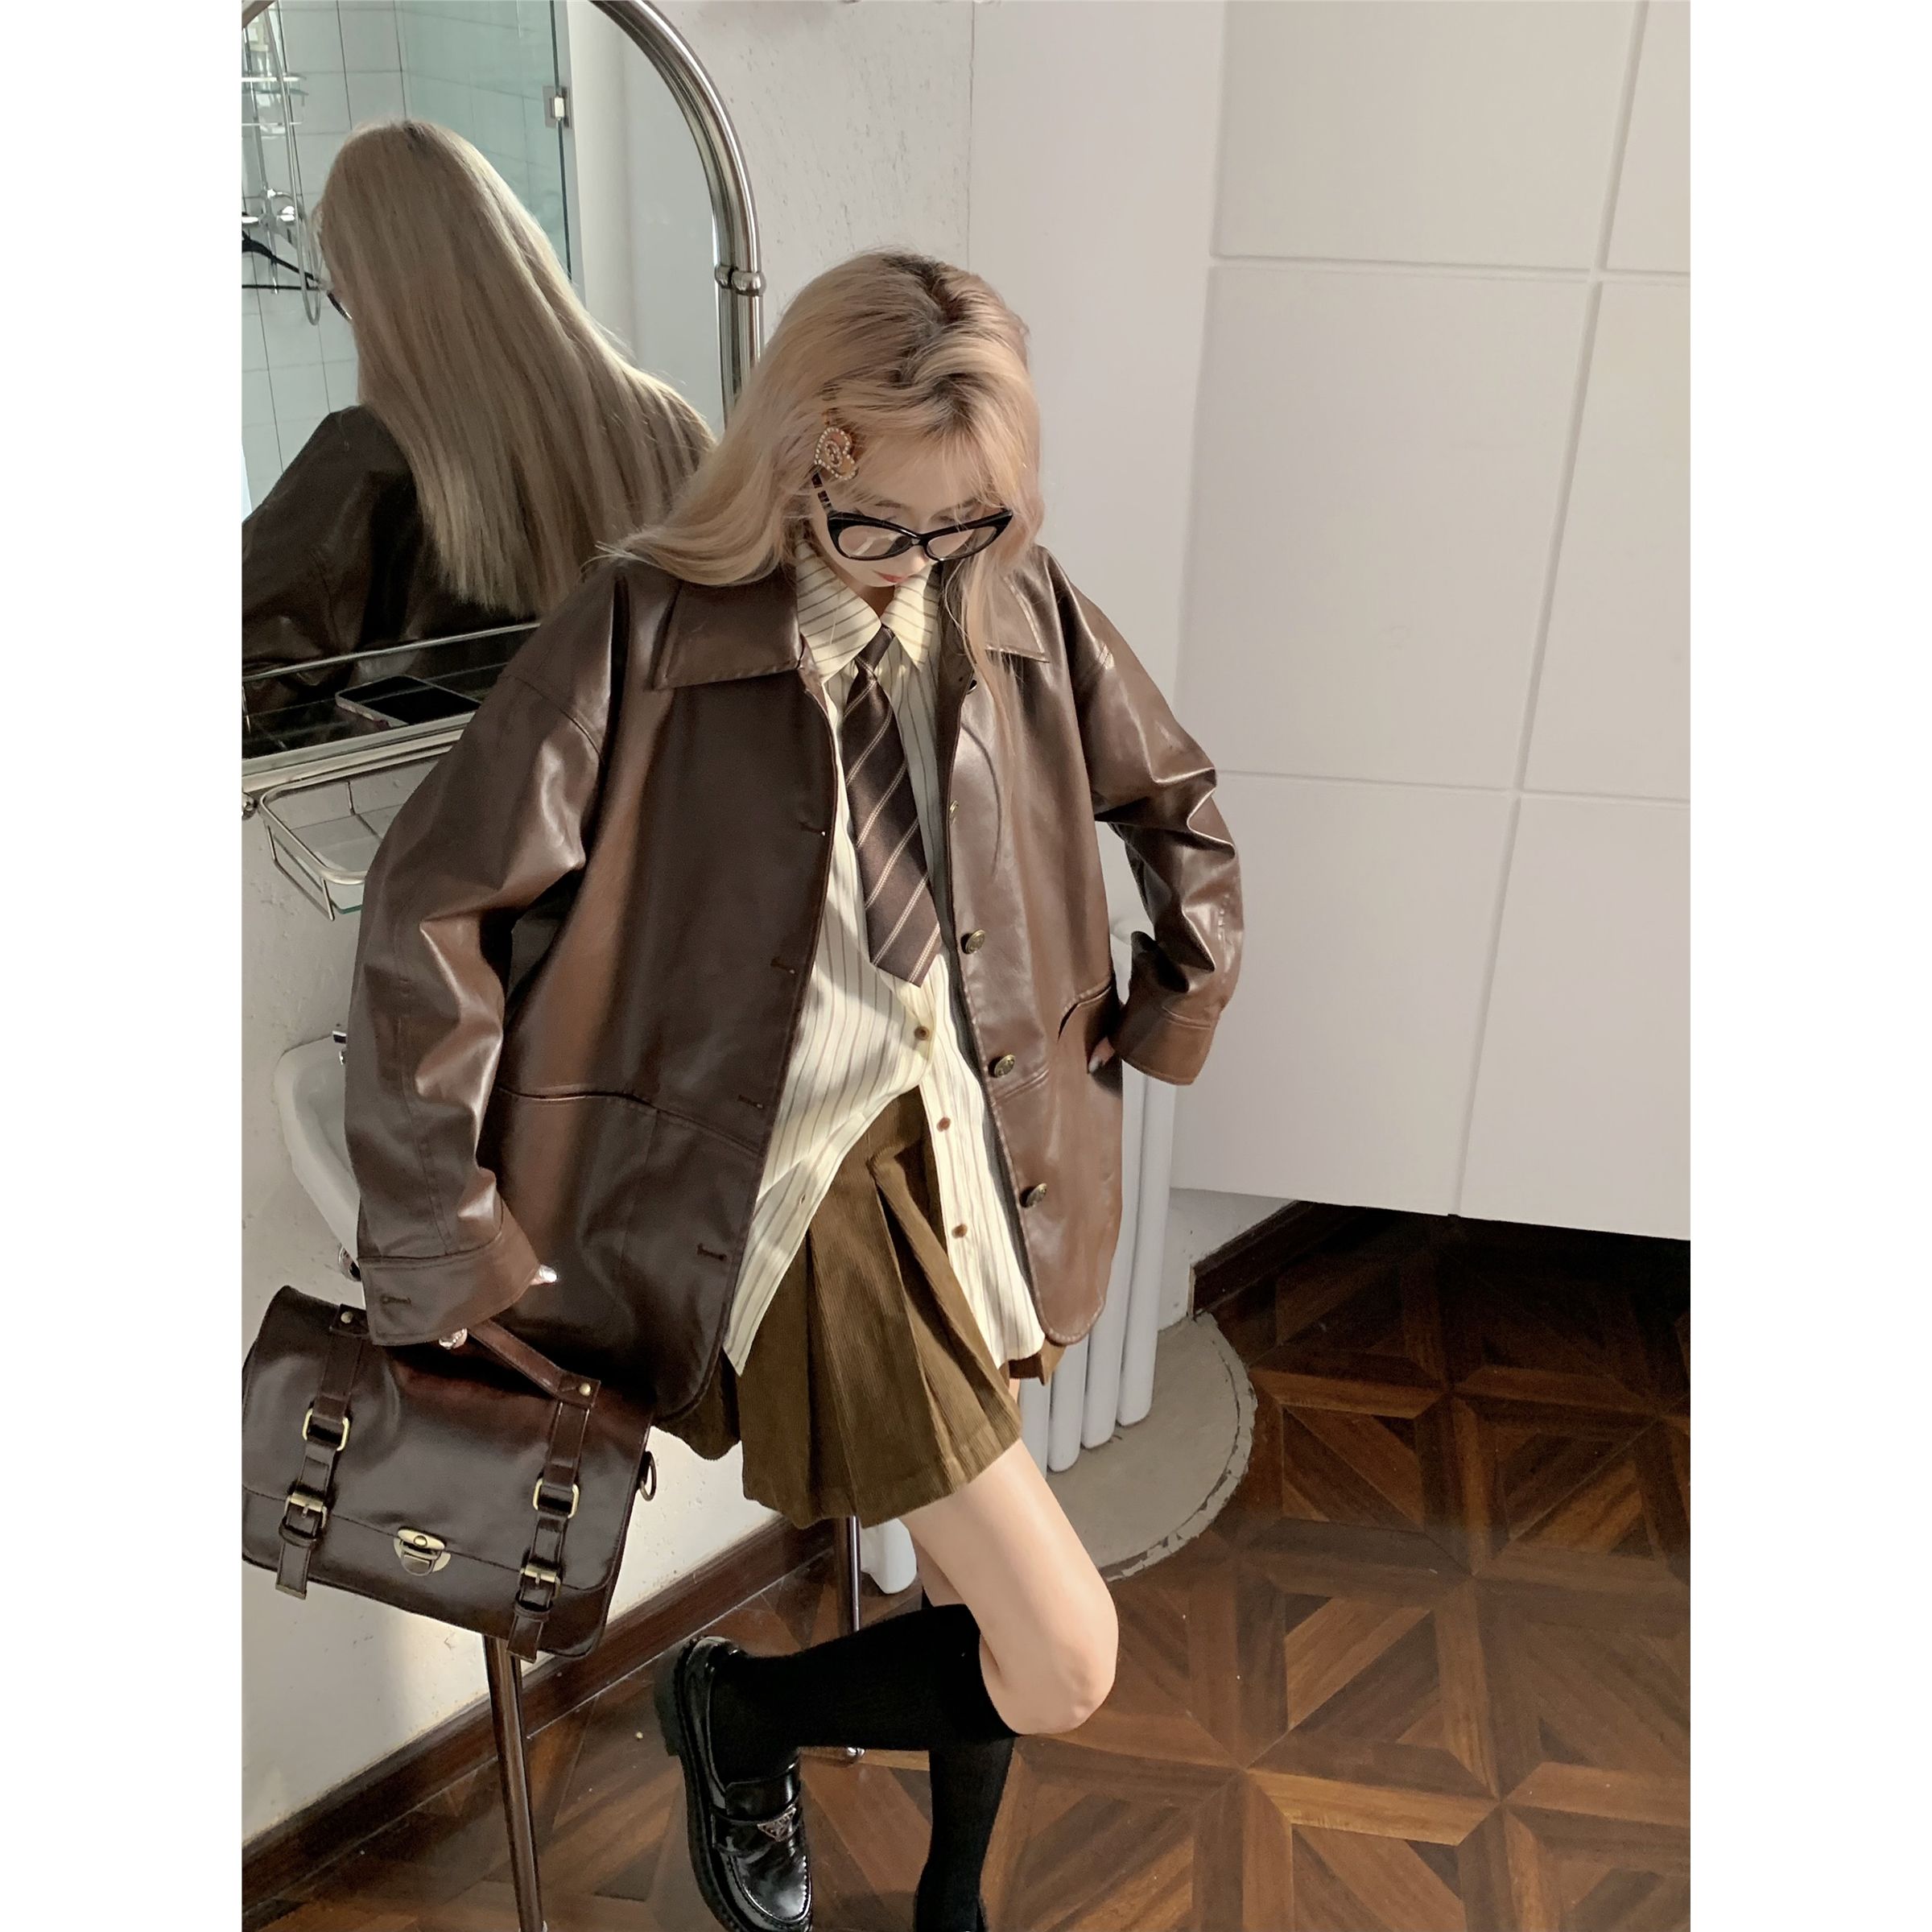 American retro brown leather motorcycle jacket for women in autumn small loose long-sleeved cardigan lapel jacket top